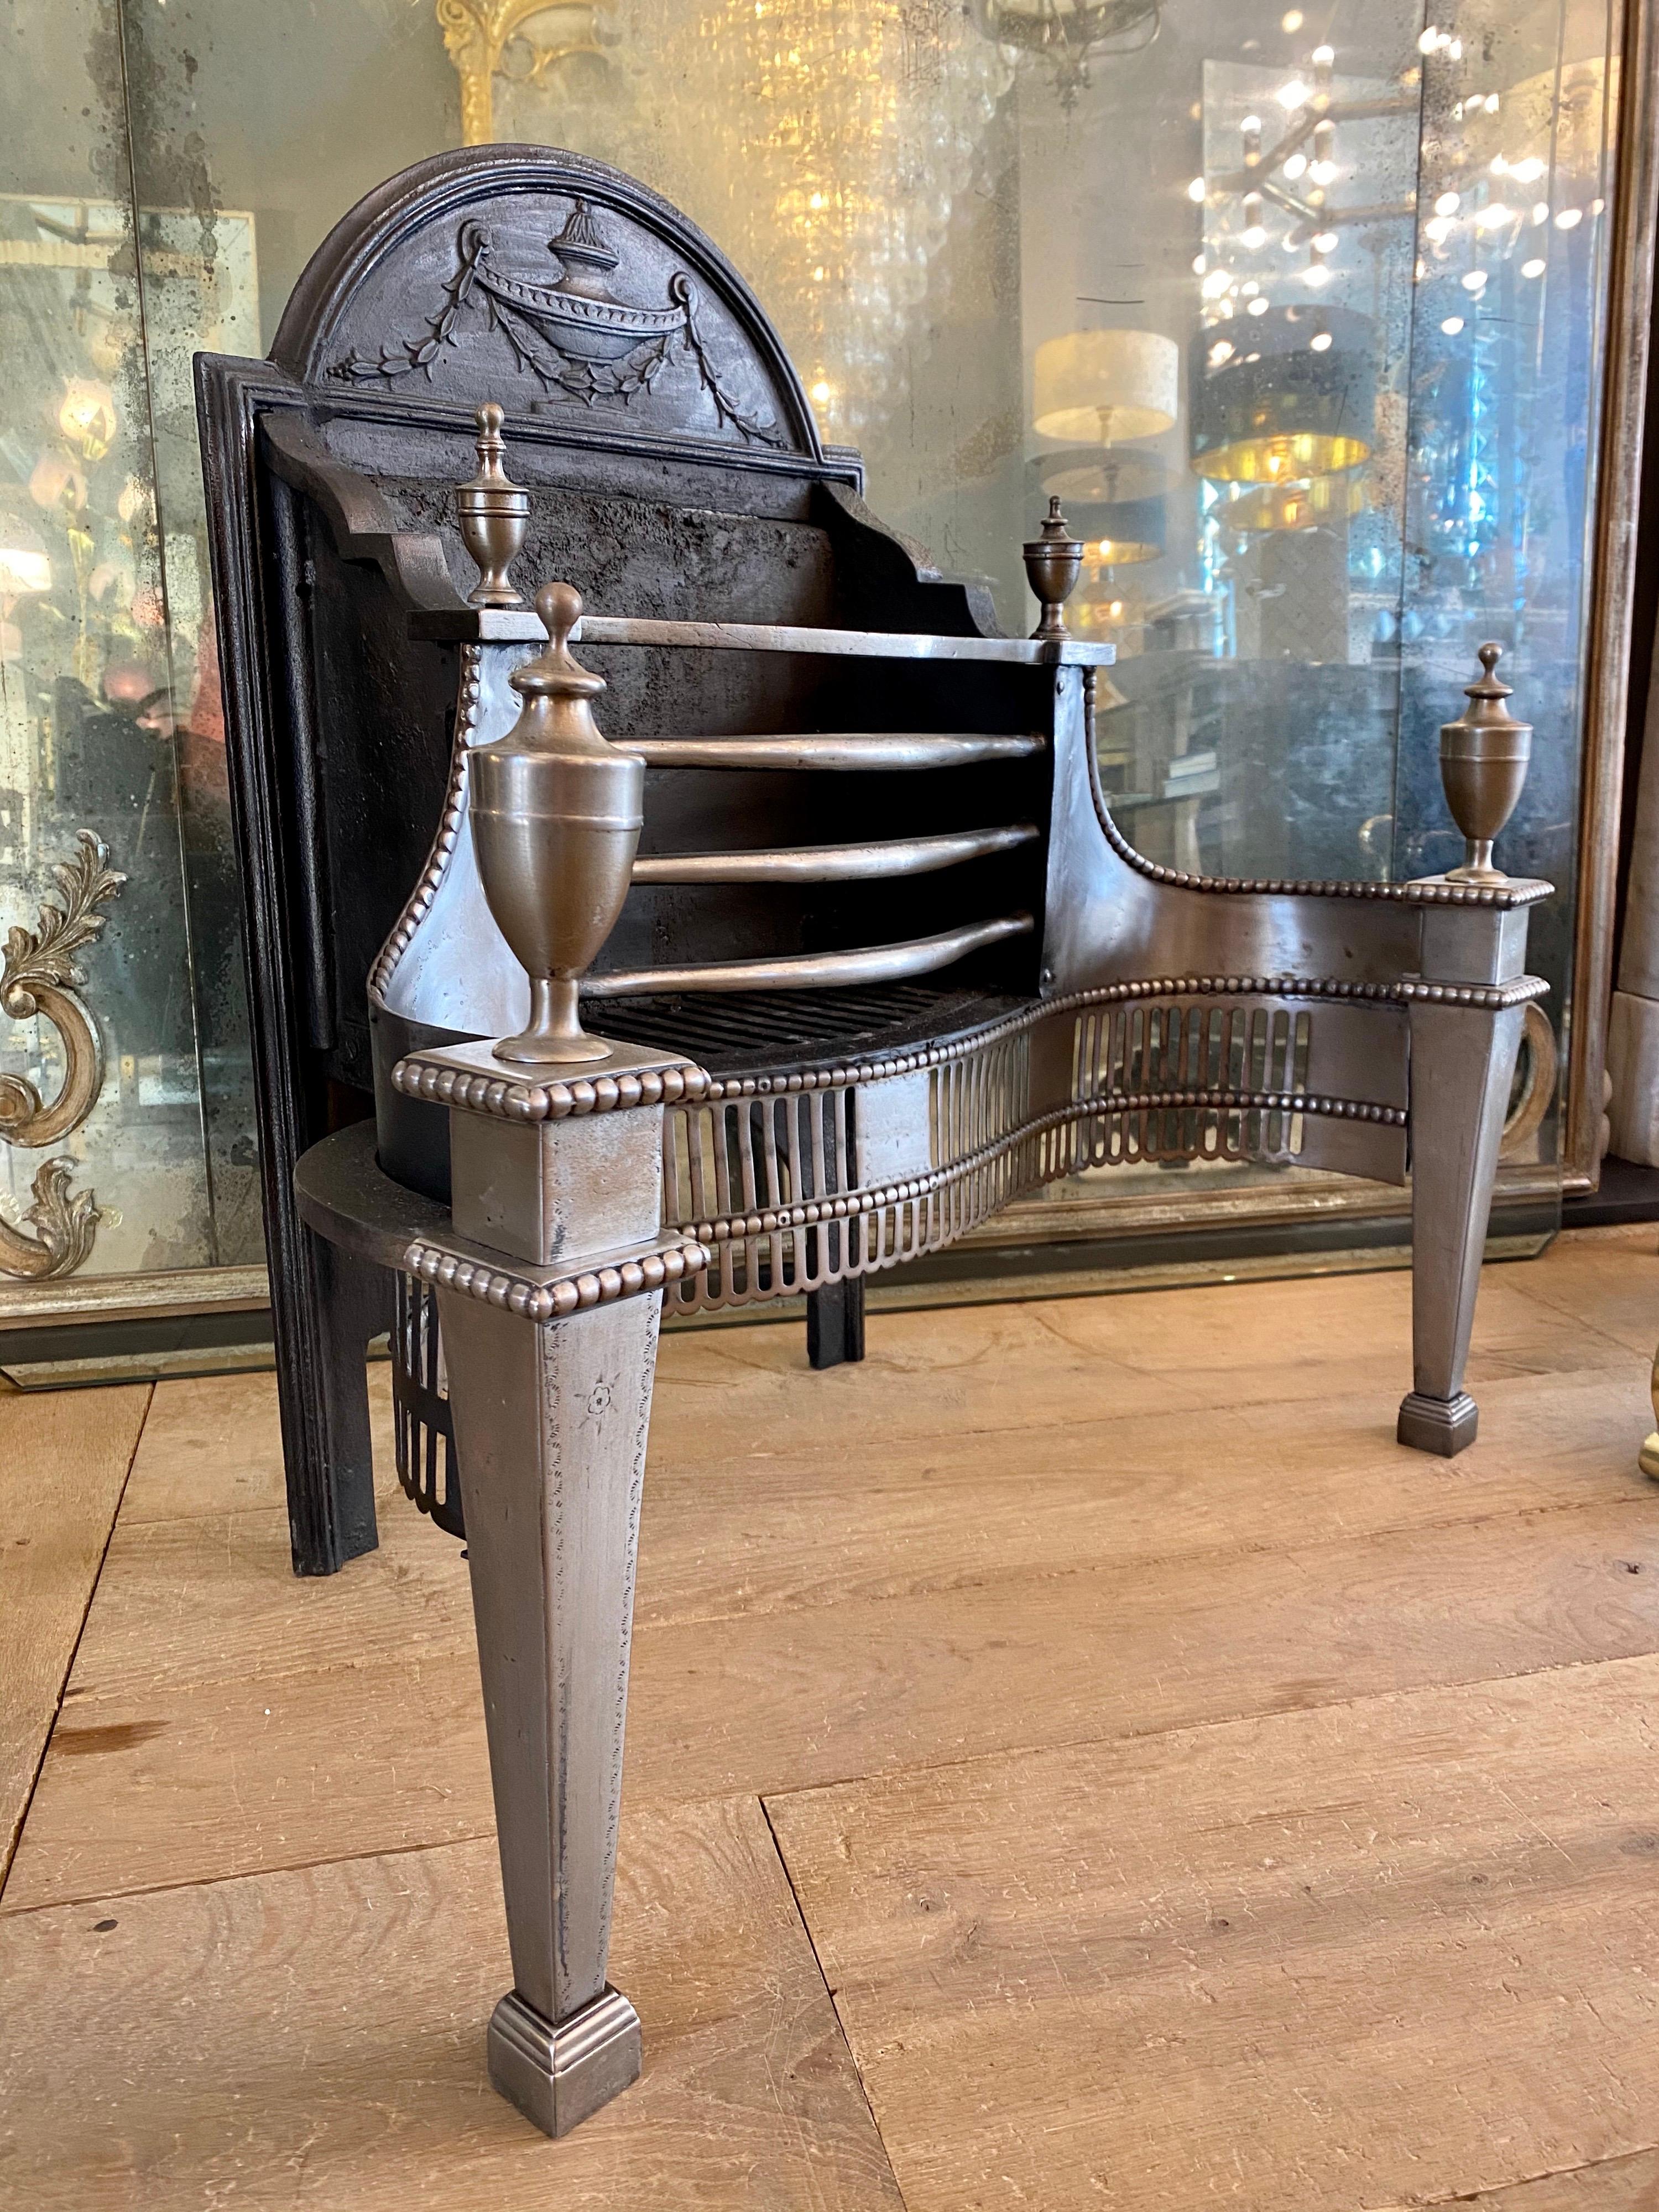 English Antique Polished Steel Fire Grate by Thomas Elsley London For Sale